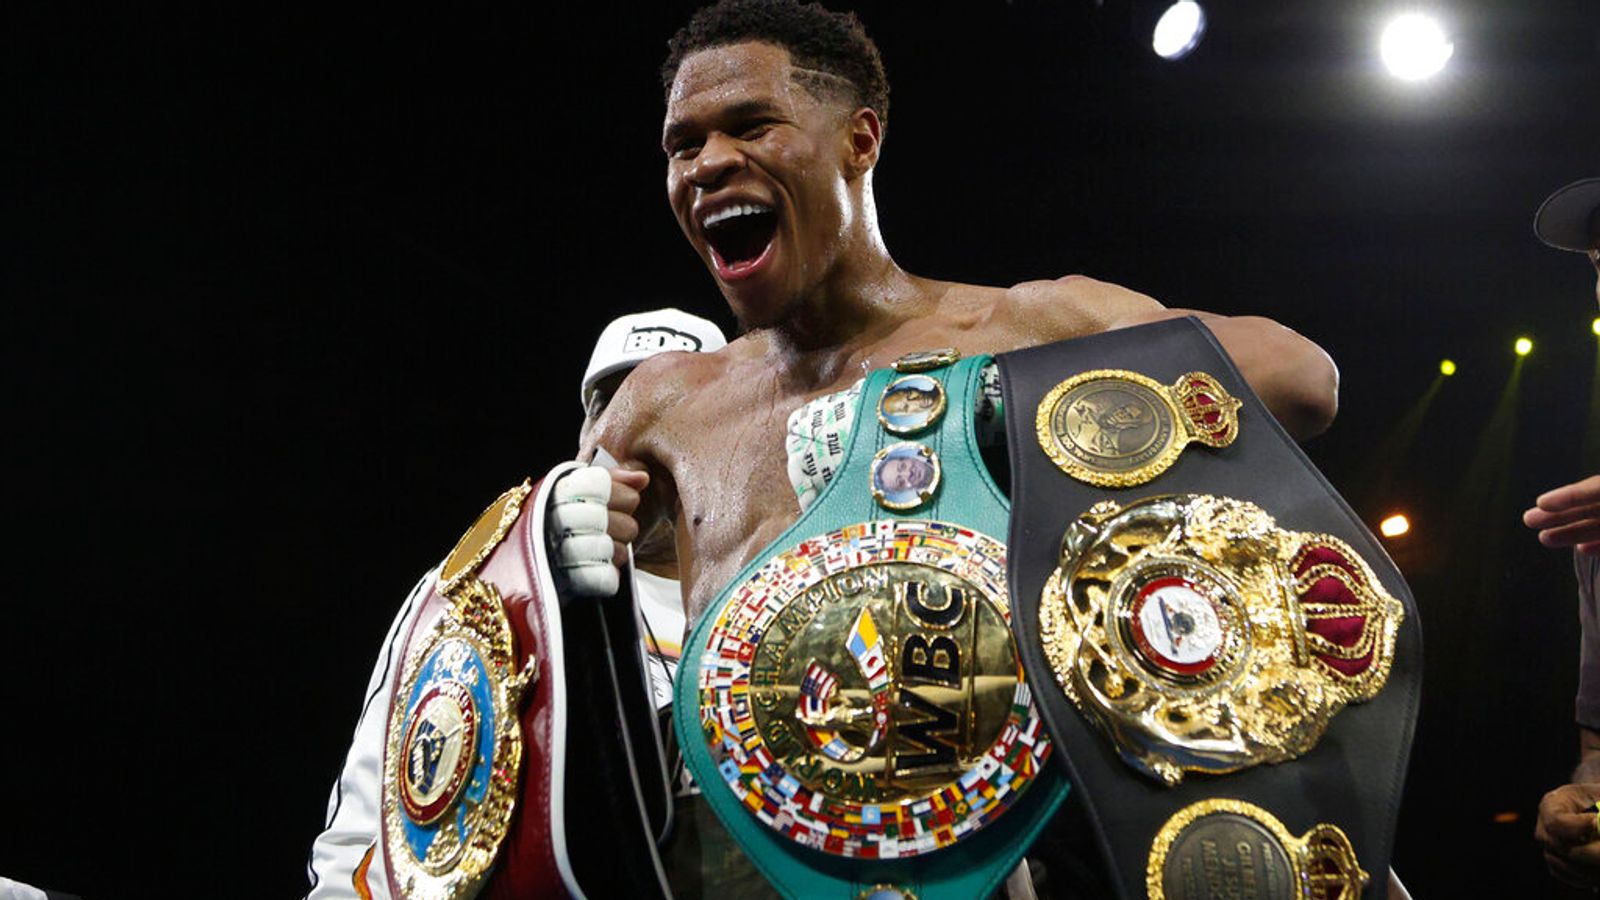 Devin Haney was crowned undisputed champion after defeating Vasiliy